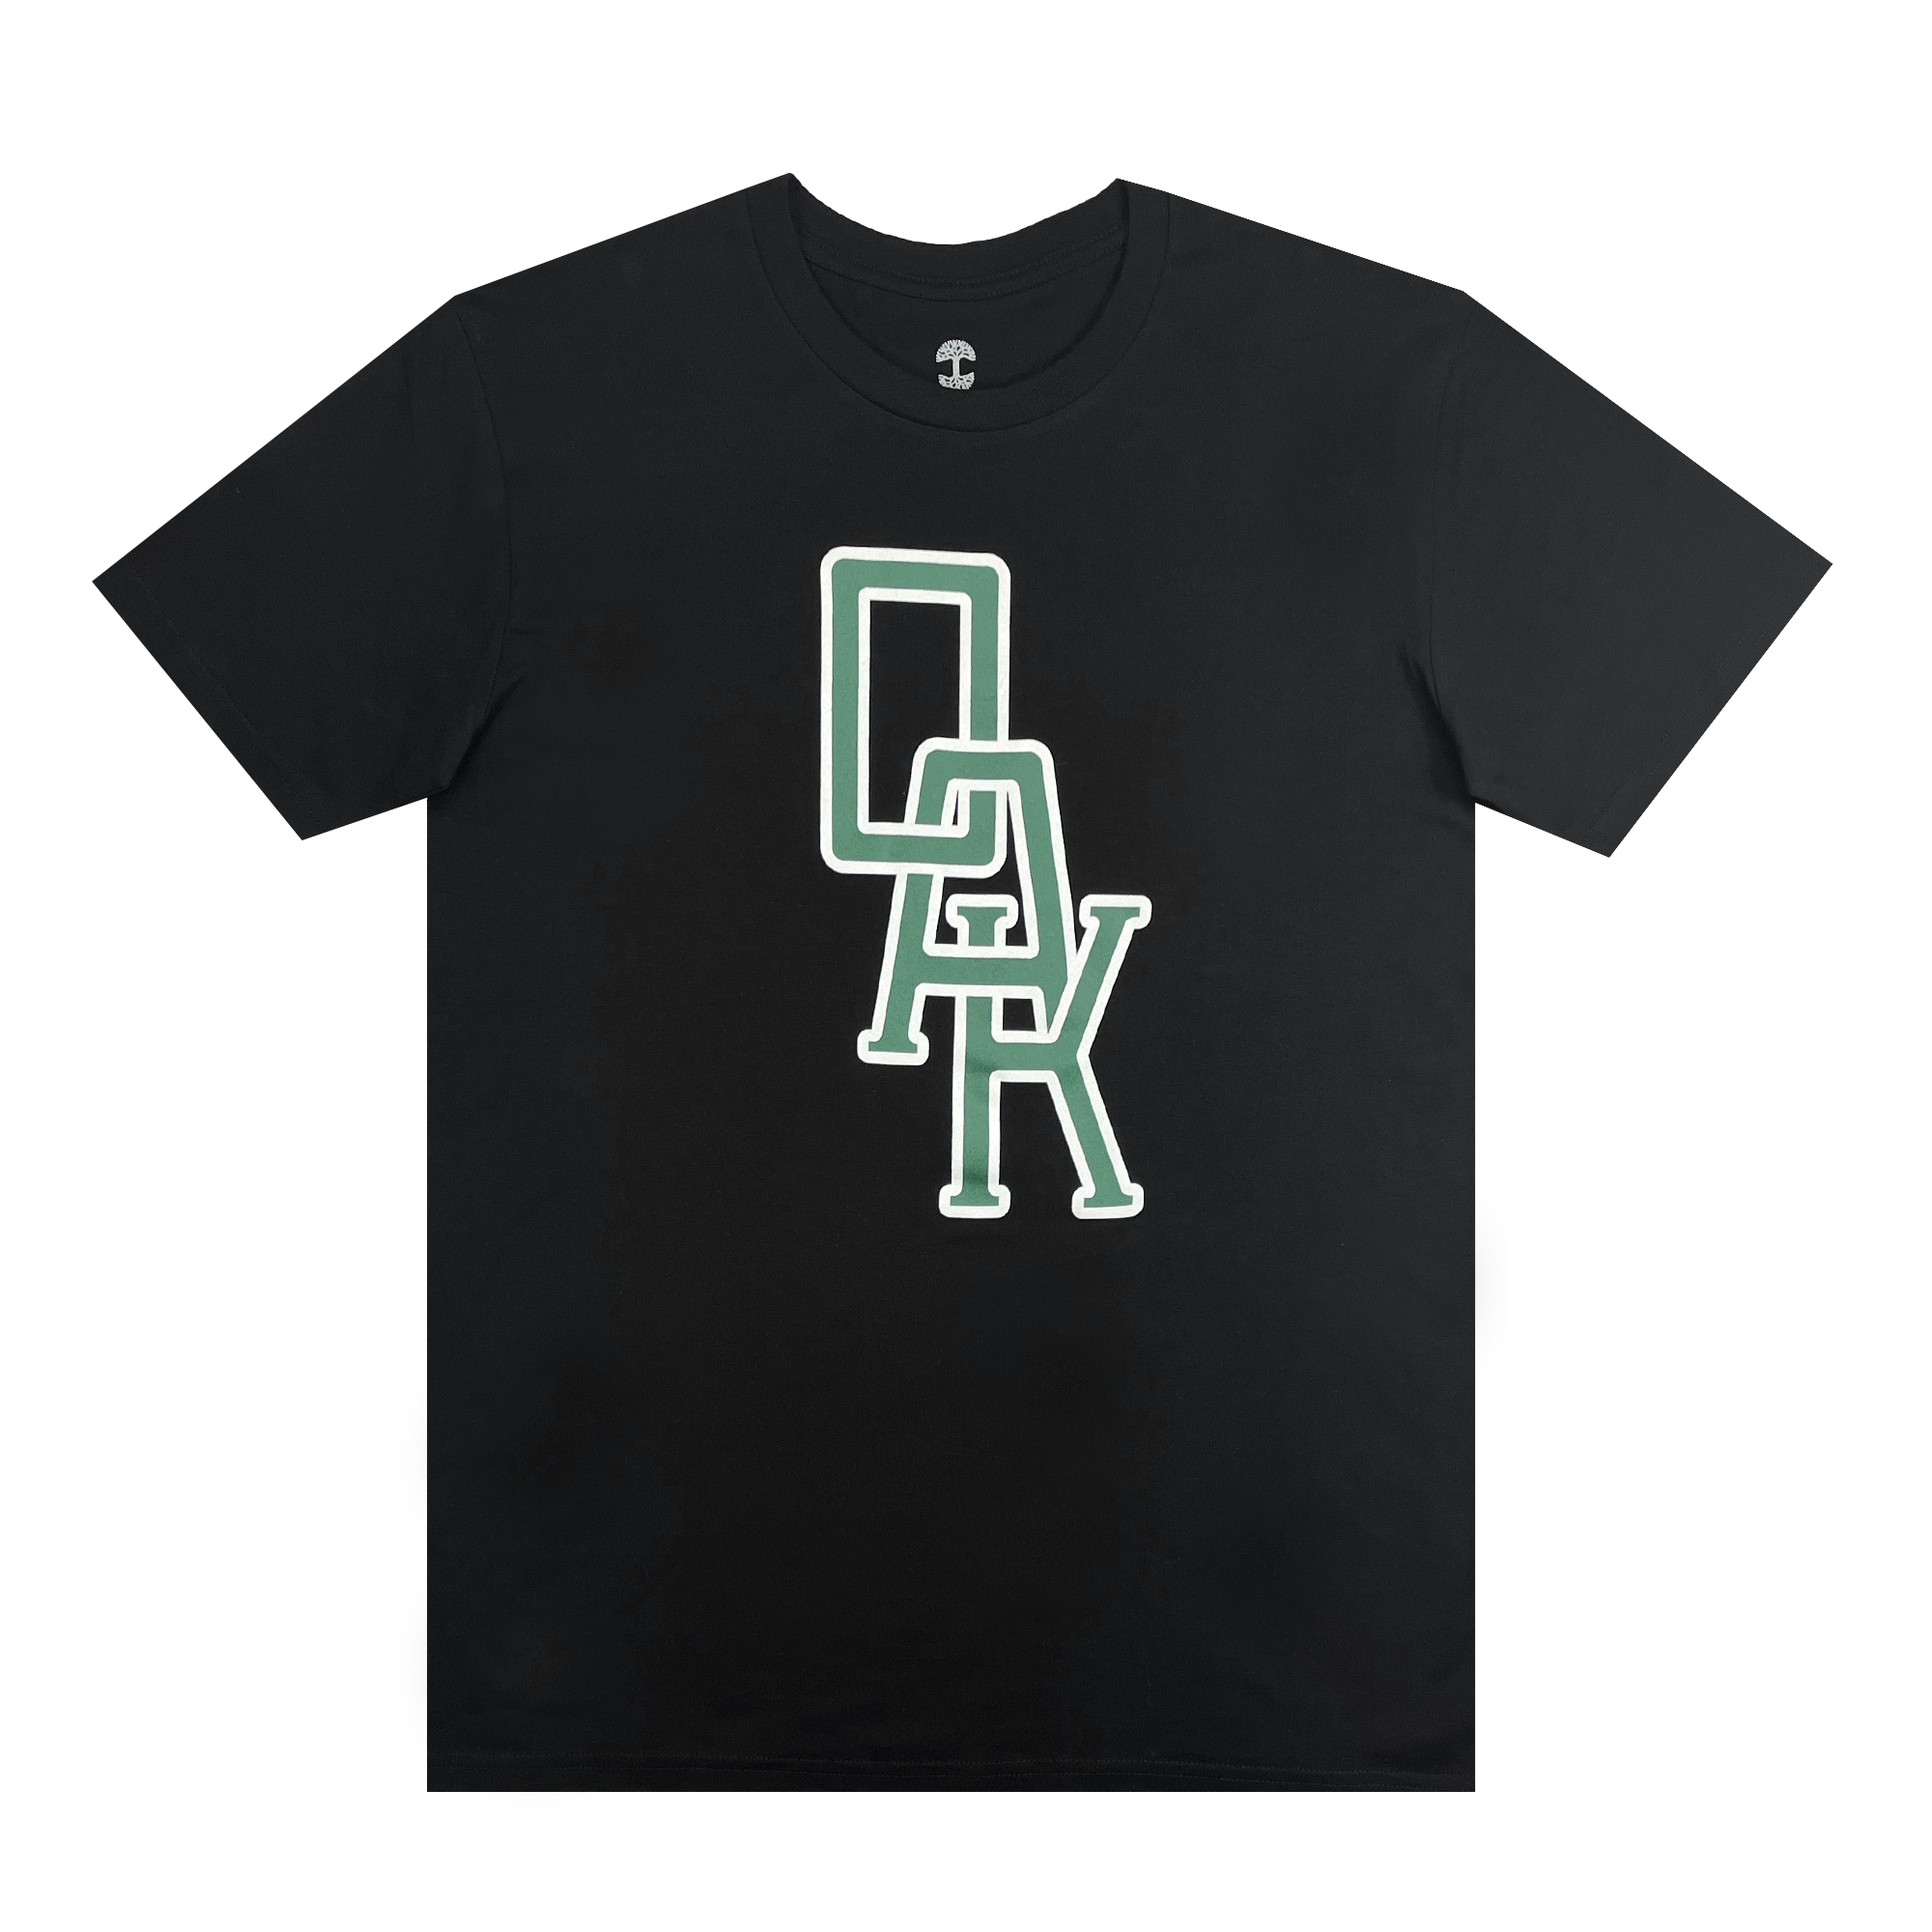 Front view of a black t-shirt with OAK monogram design centered in green and white.